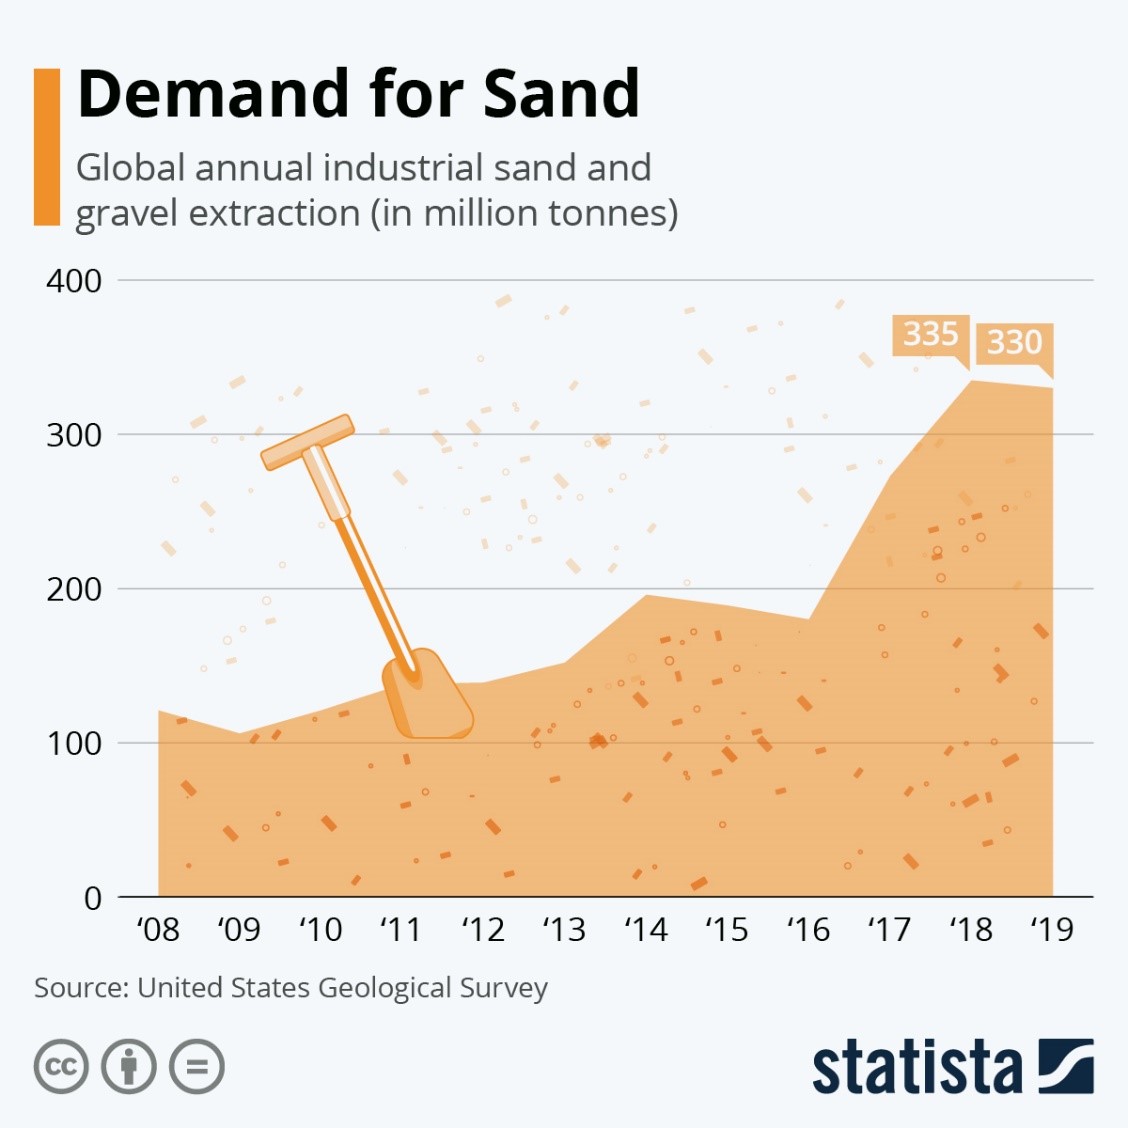 demand for sand is rather high